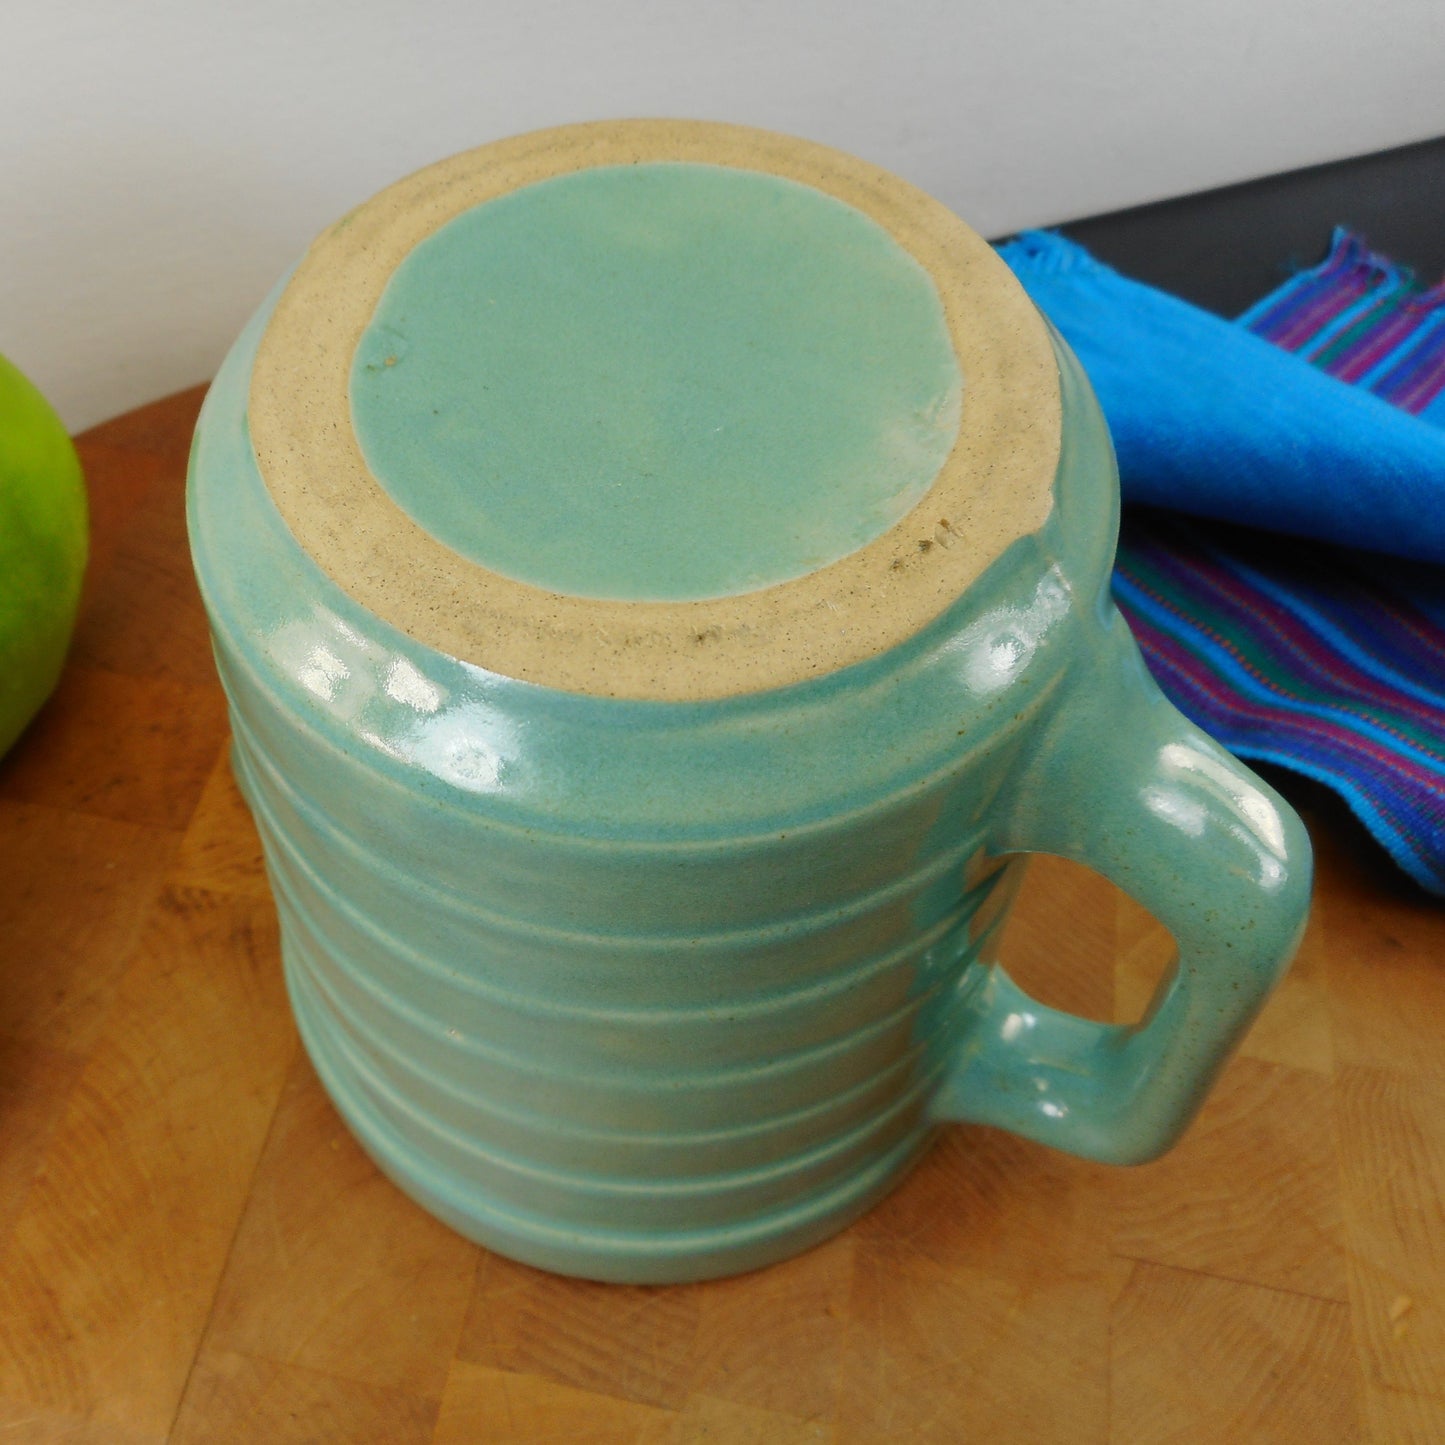 USA Stamped Vintage Unbranded 5" Turquoise Stoneware Pottery Pitcher - Bands Rings Ribs